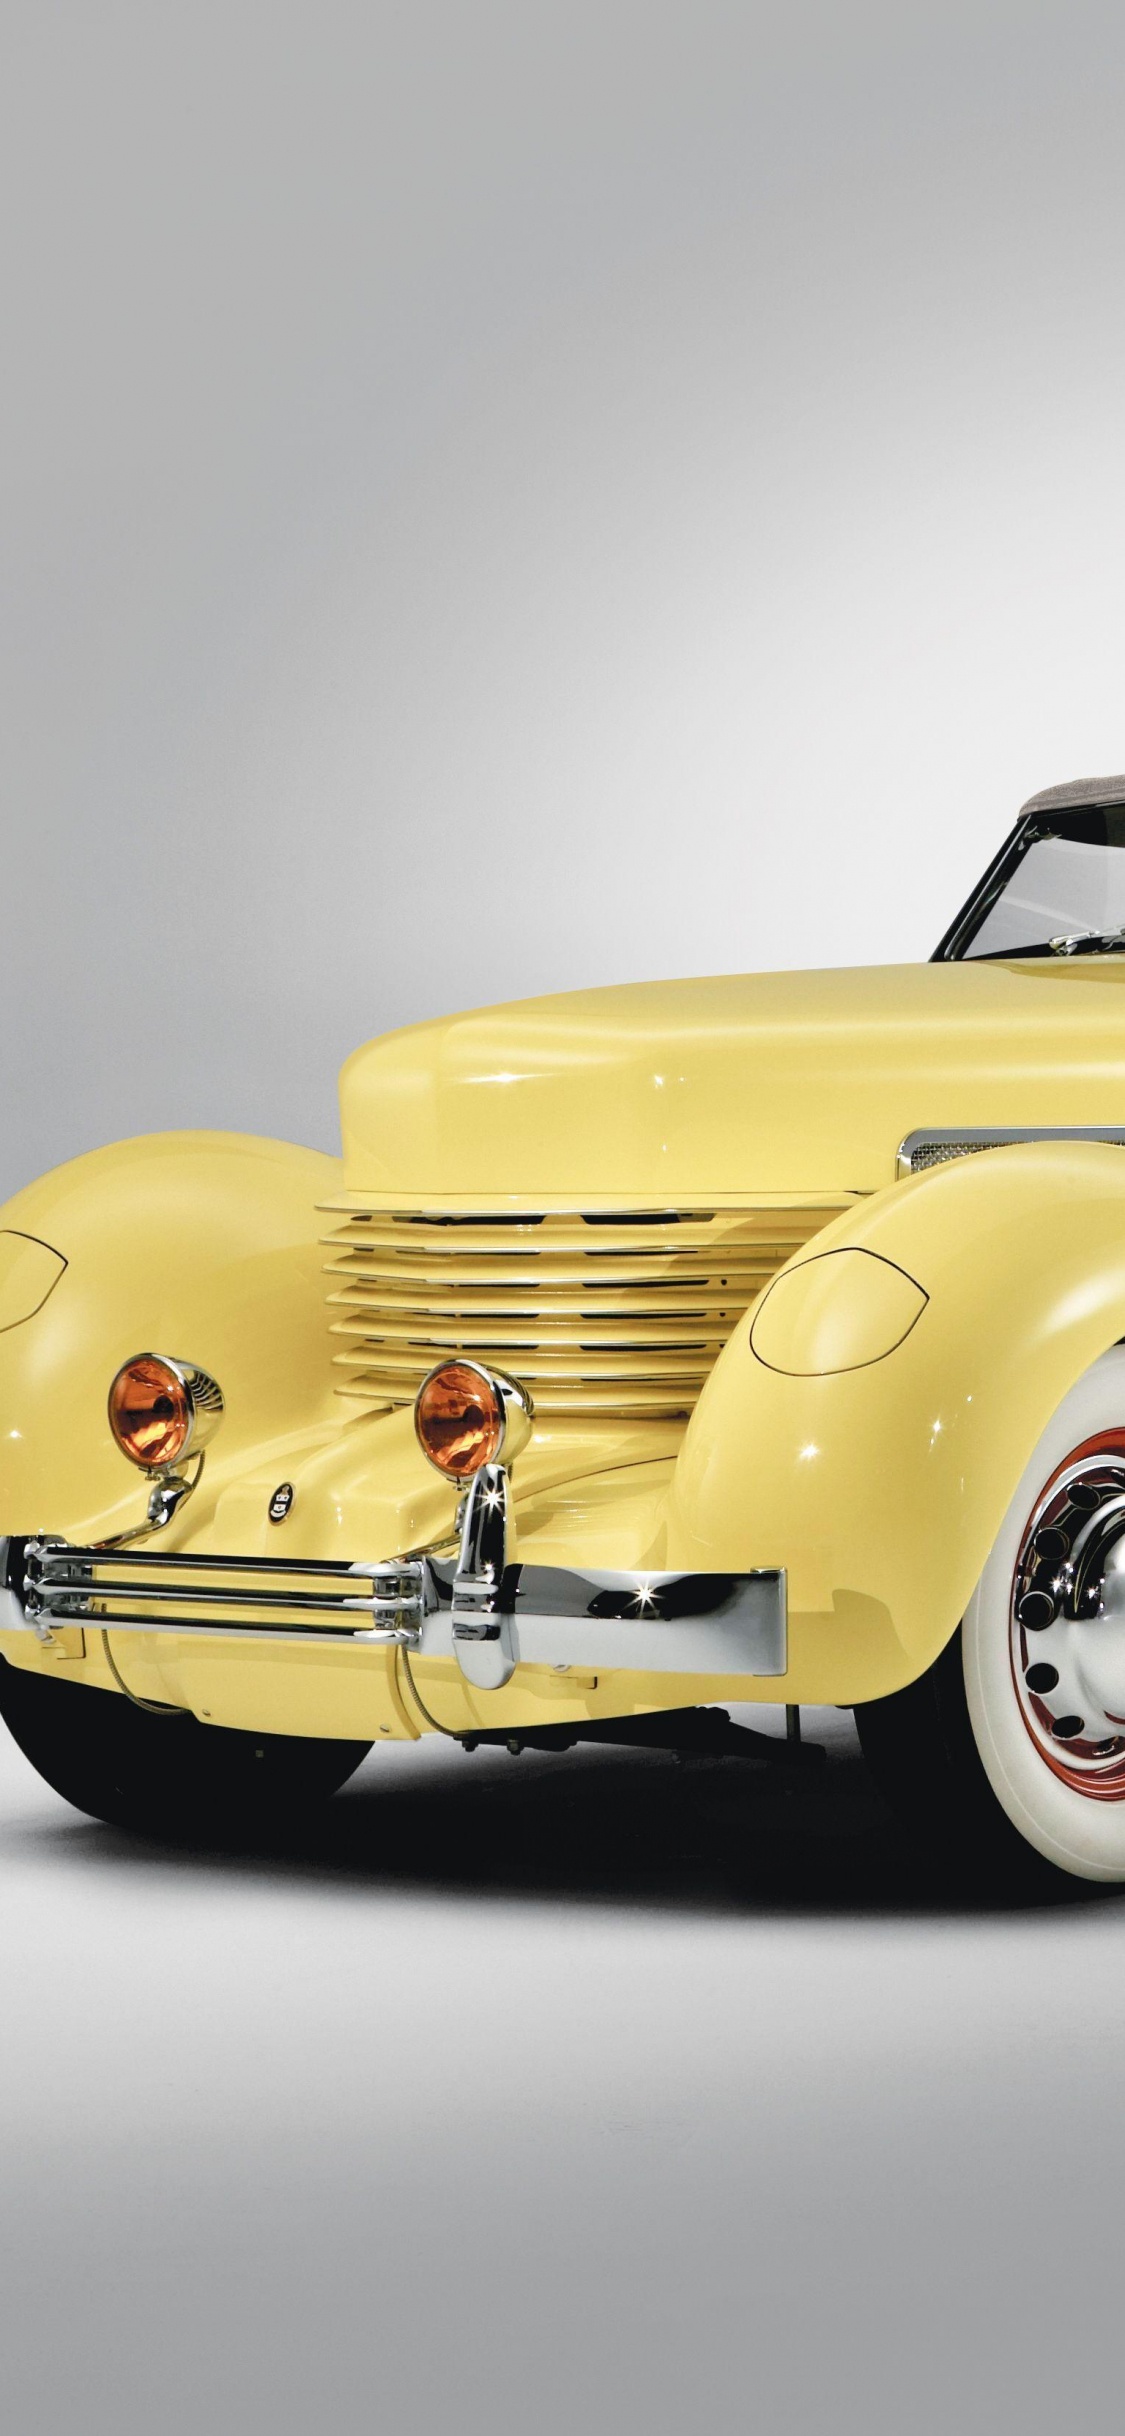 Yellow Vintage Car on White Background. Wallpaper in 1125x2436 Resolution